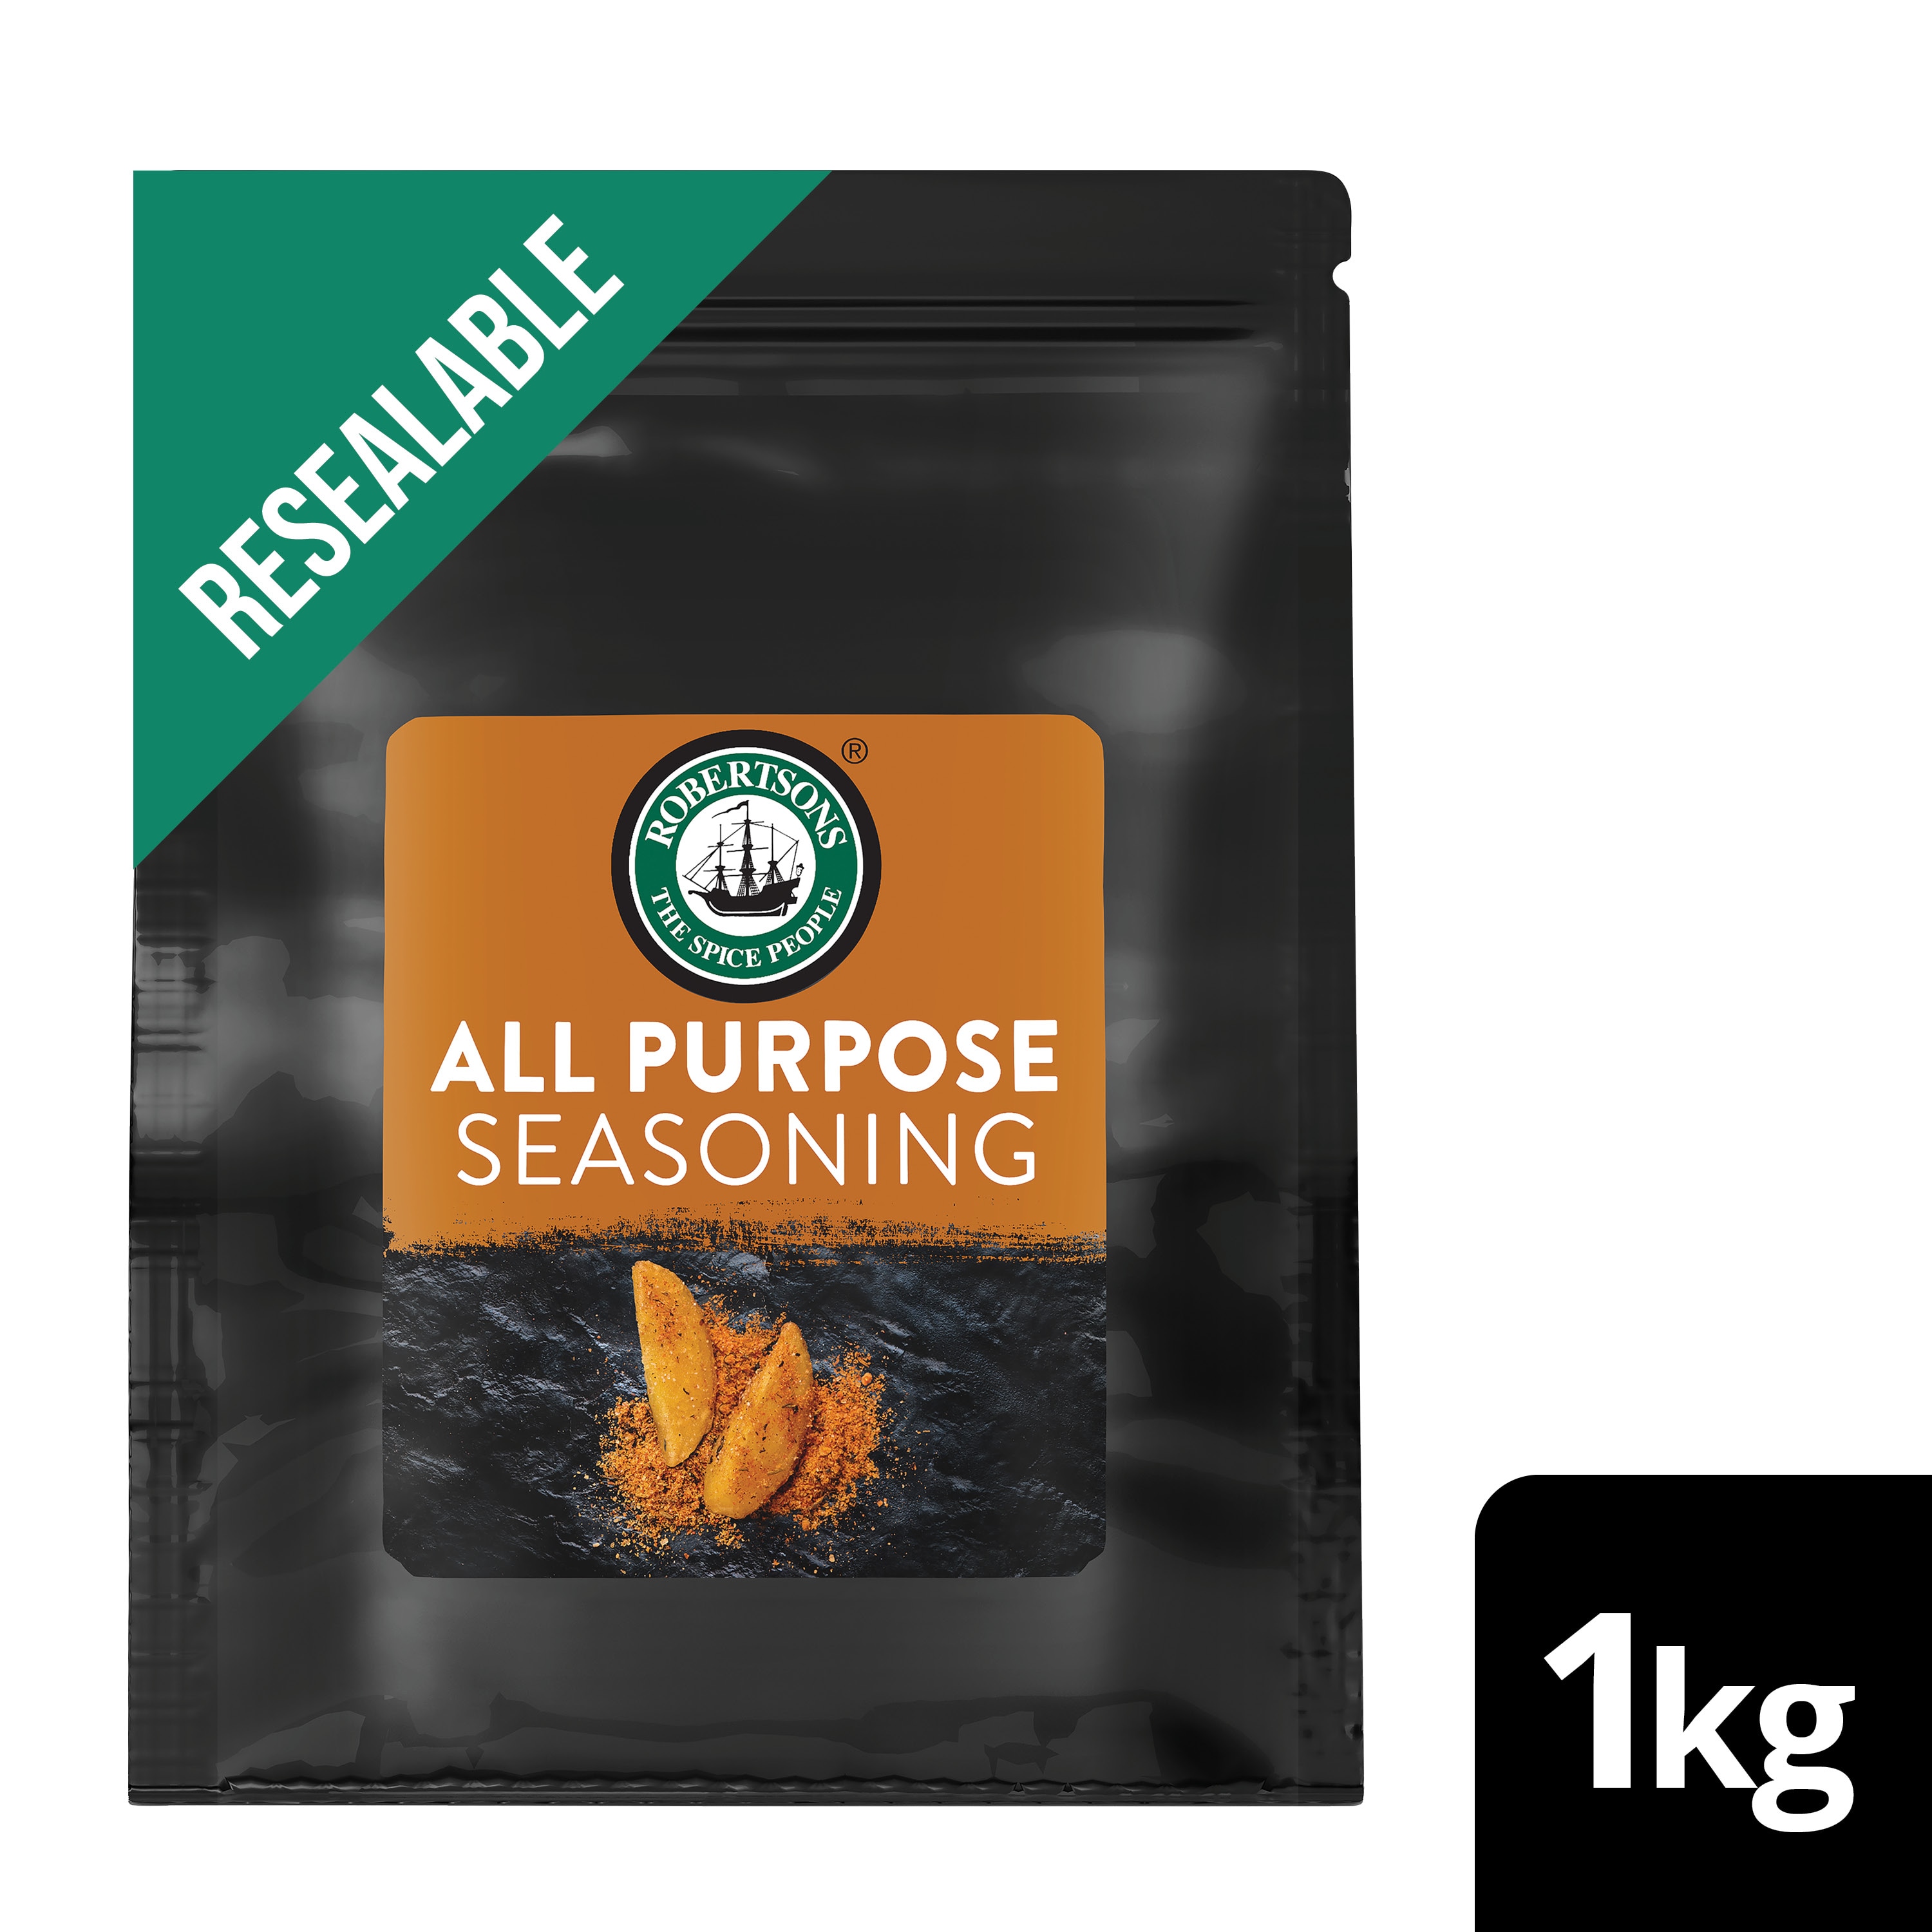 Robertsons All Purpose Seasoning (Pouch) 1 Kg - Robertsons All Purpose Seasoning is a golden colour and provides an authentic herbs and spices texture.